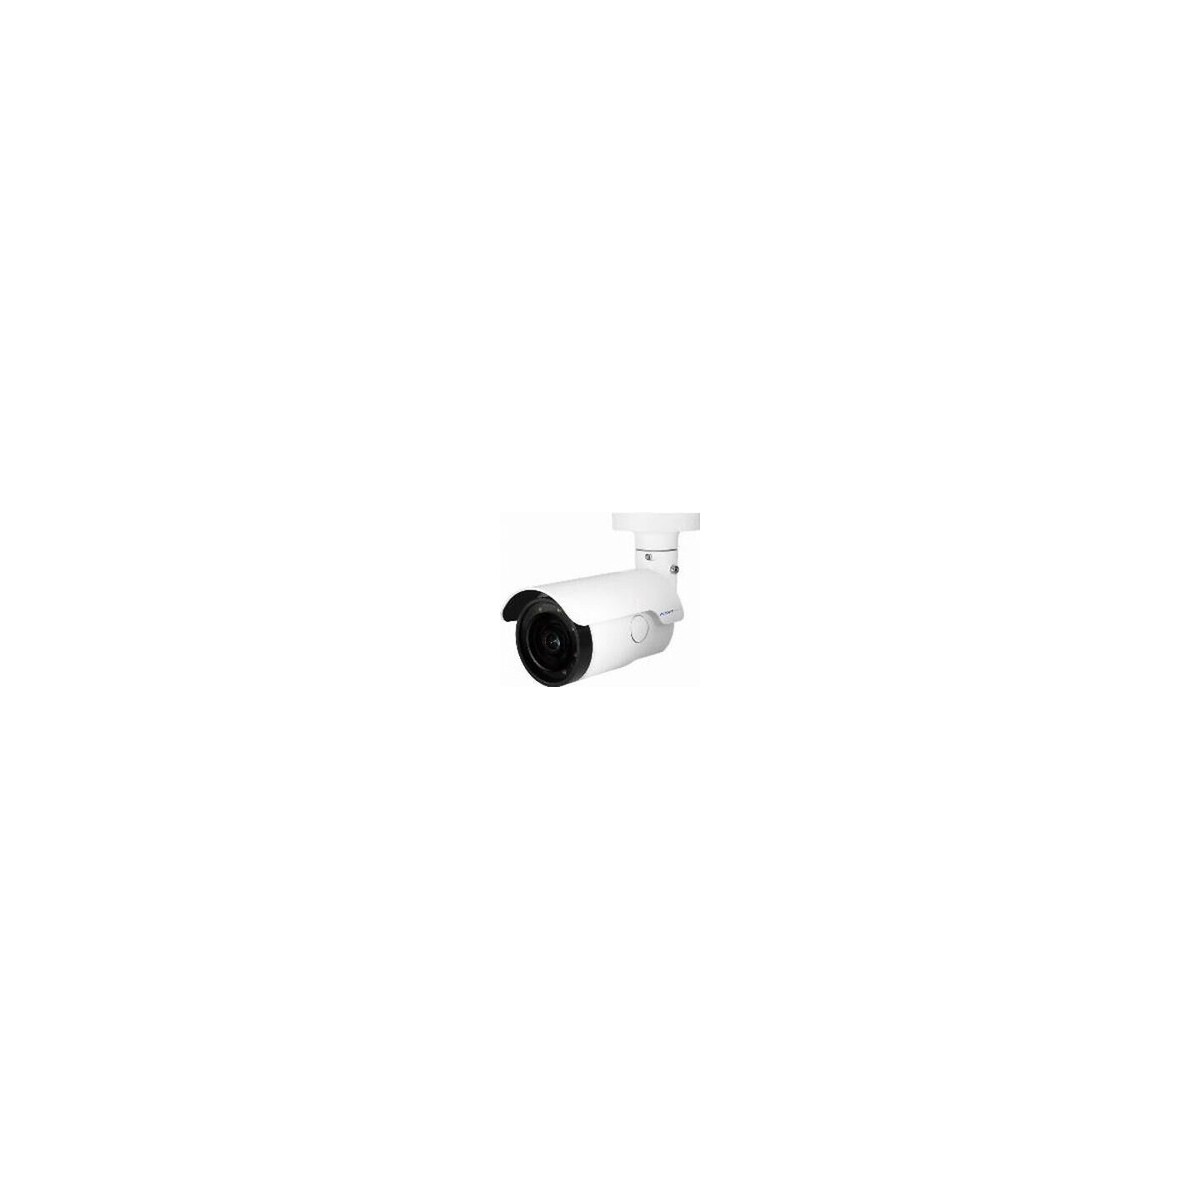 Mobotix Move - IP security camera - Indoor  outdoor - Wired - 95000 h - Ceiling-wall - Black - White